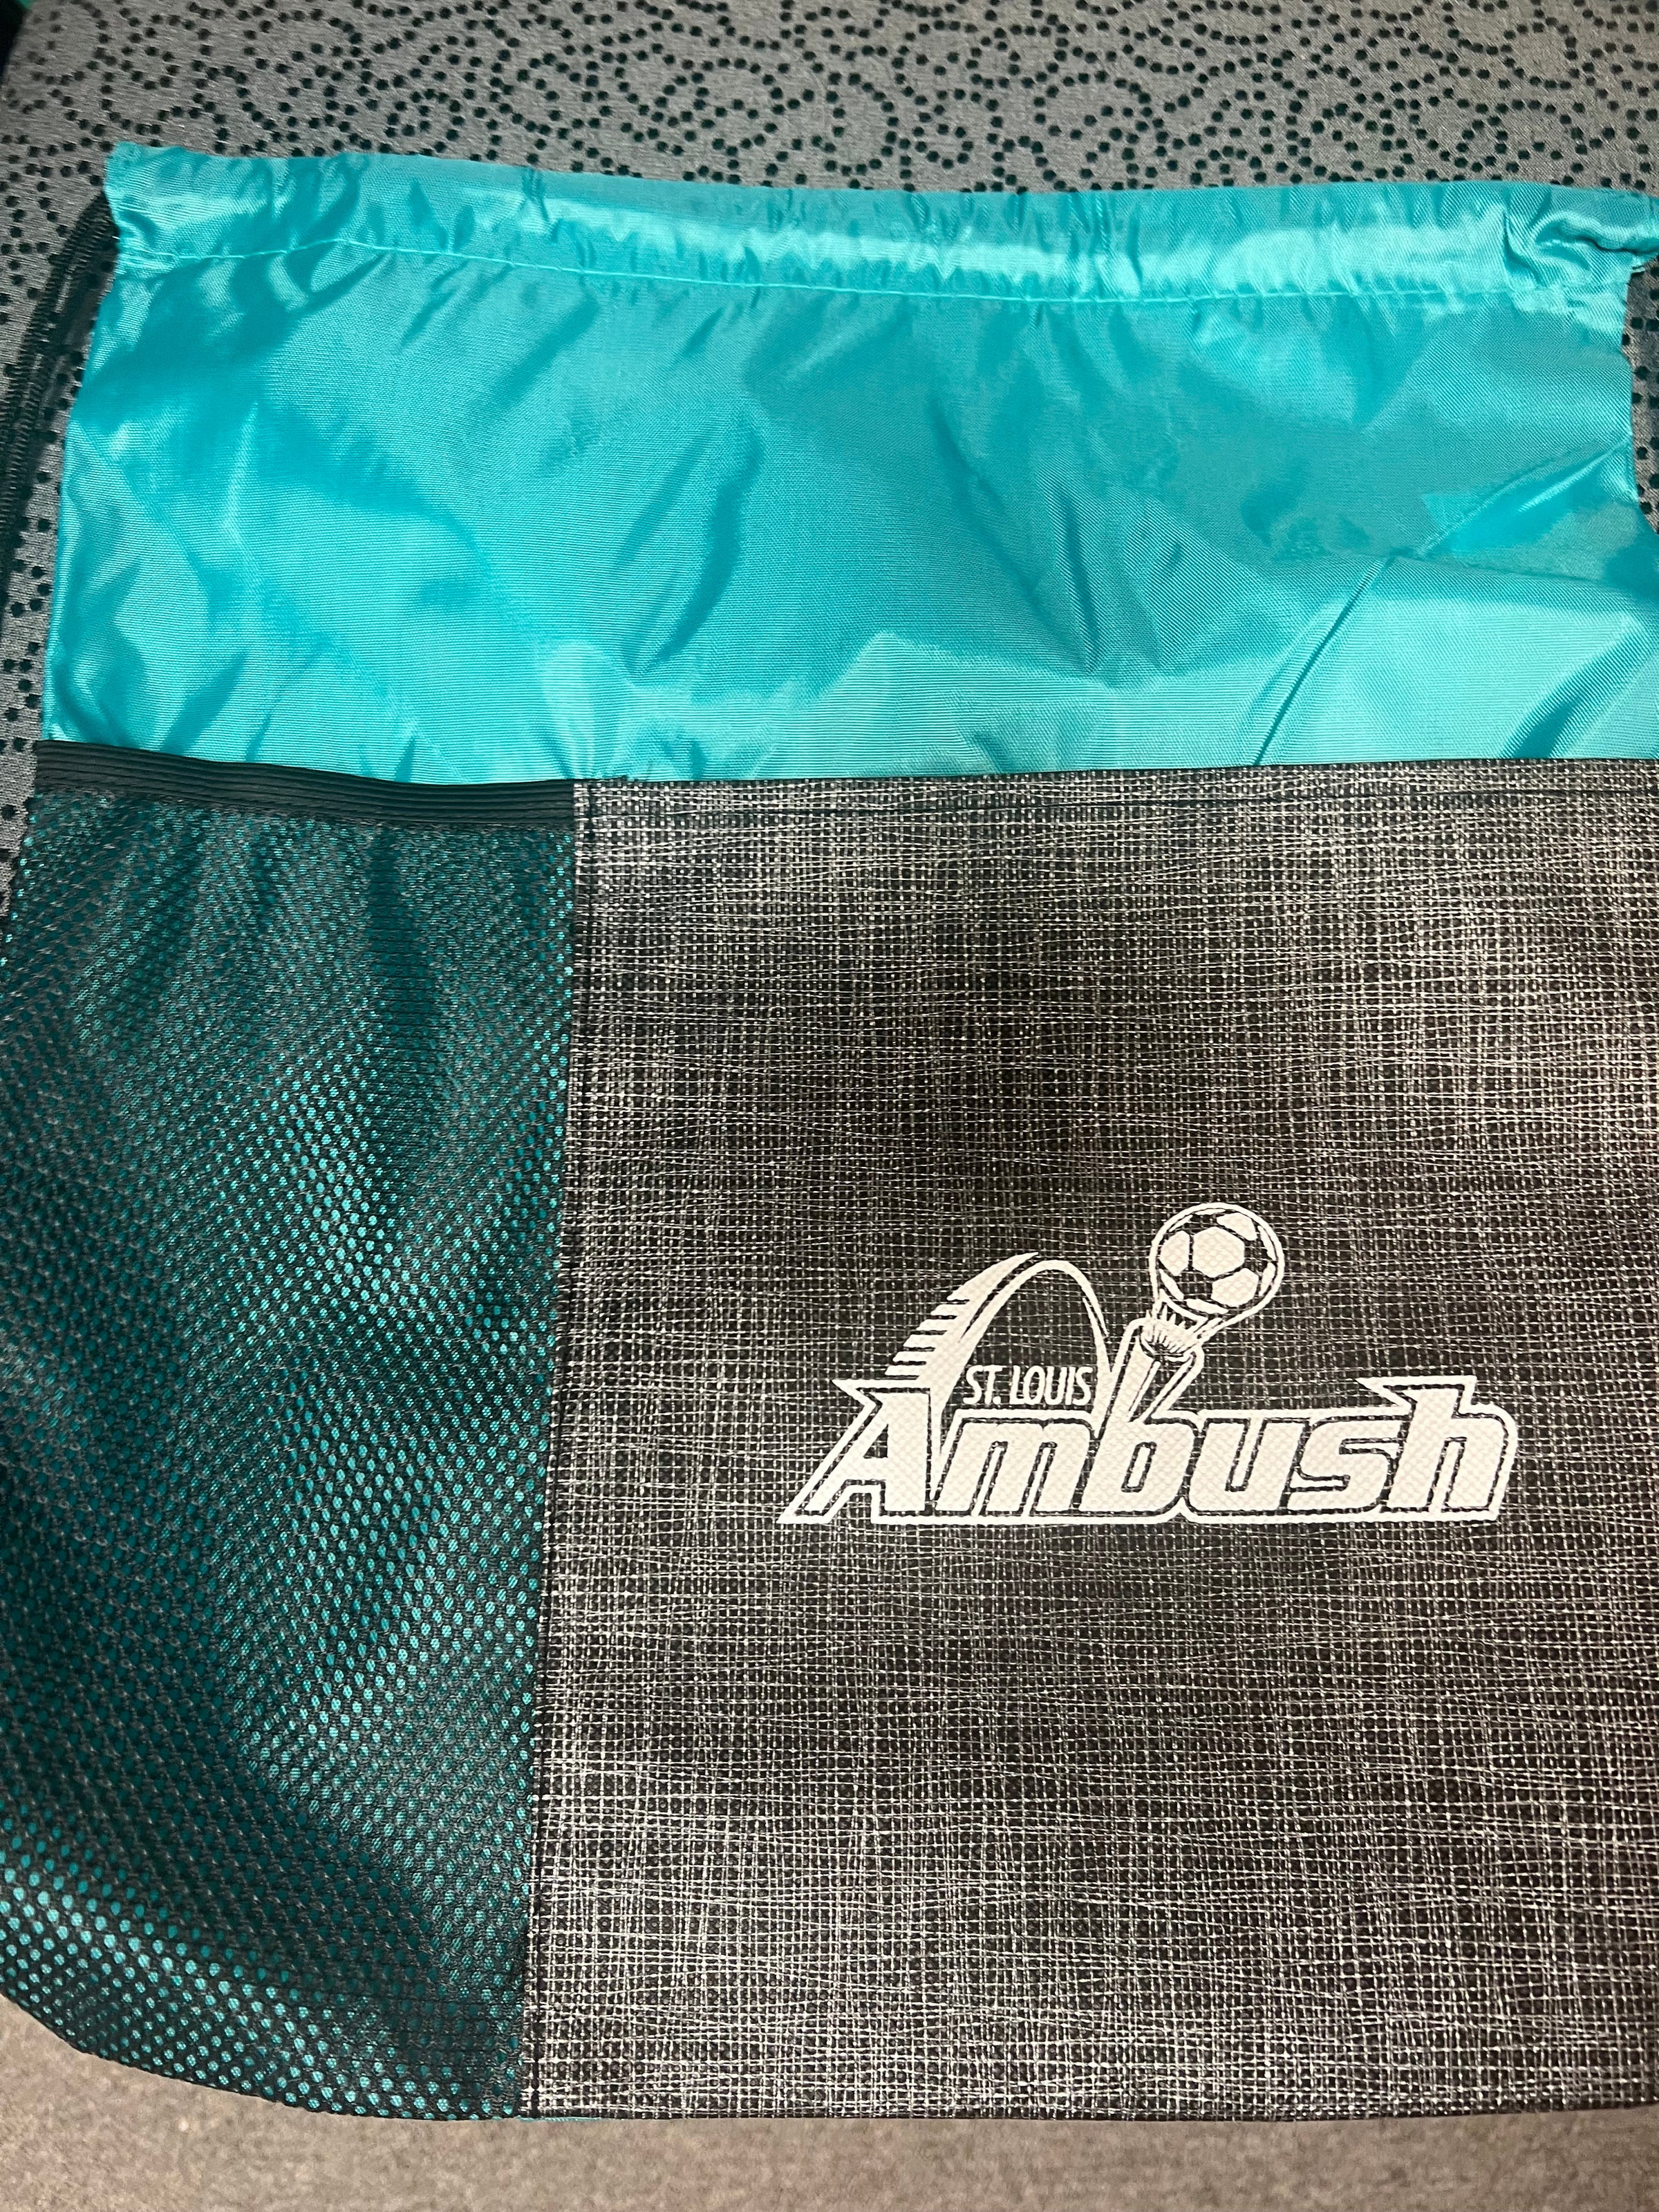 St. Louis Ambush - Our RETRO JERSEY AUCTION for Saturday's game jerseys is  NOW LIVE! Bid on your favorite players jersey one of two ways 👇 💻   📱 Text RETRO to